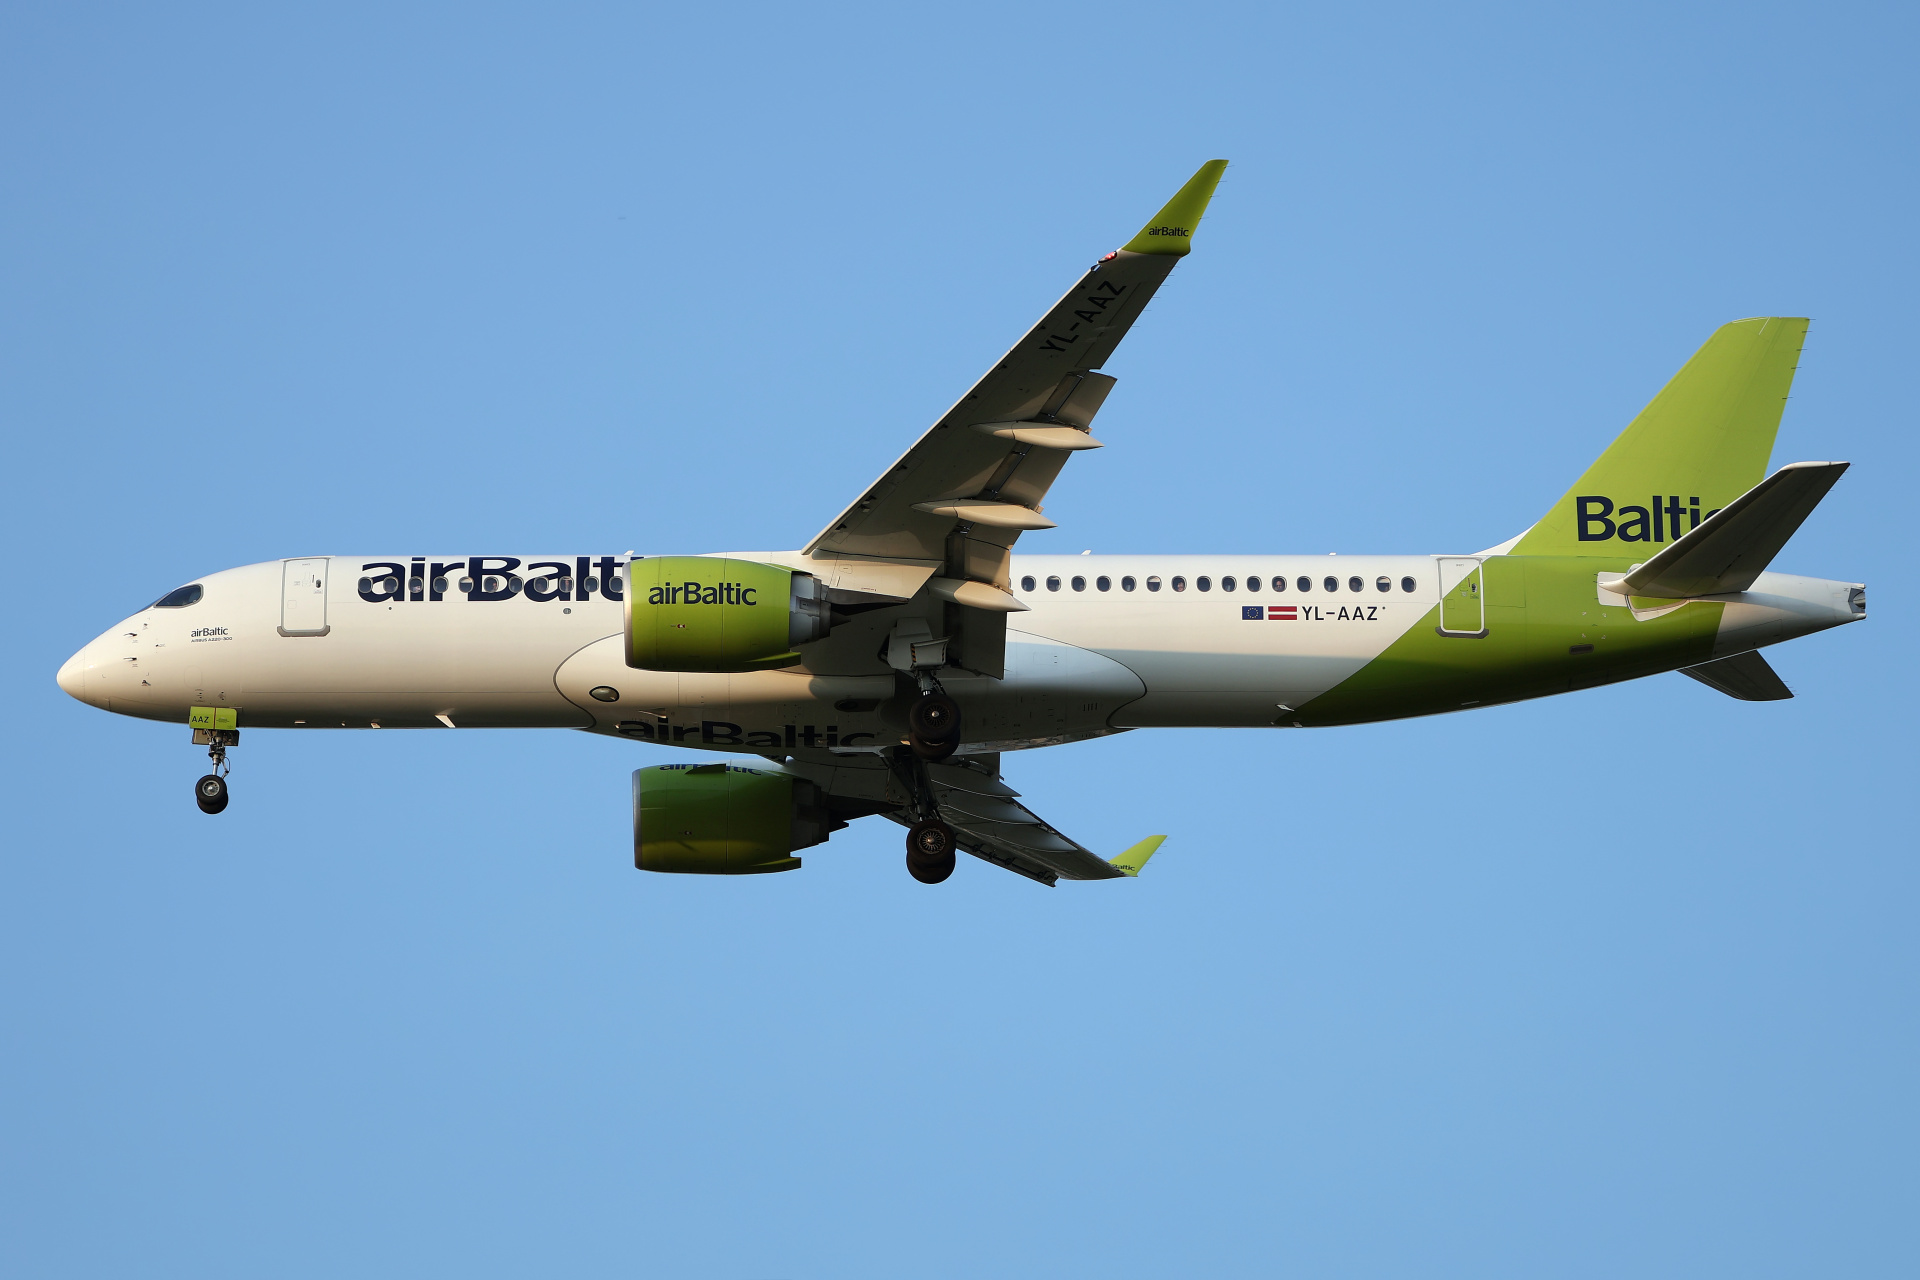 YL-AAZ (Aircraft » EPWA Spotting » Airbus A220-300 » airBaltic)